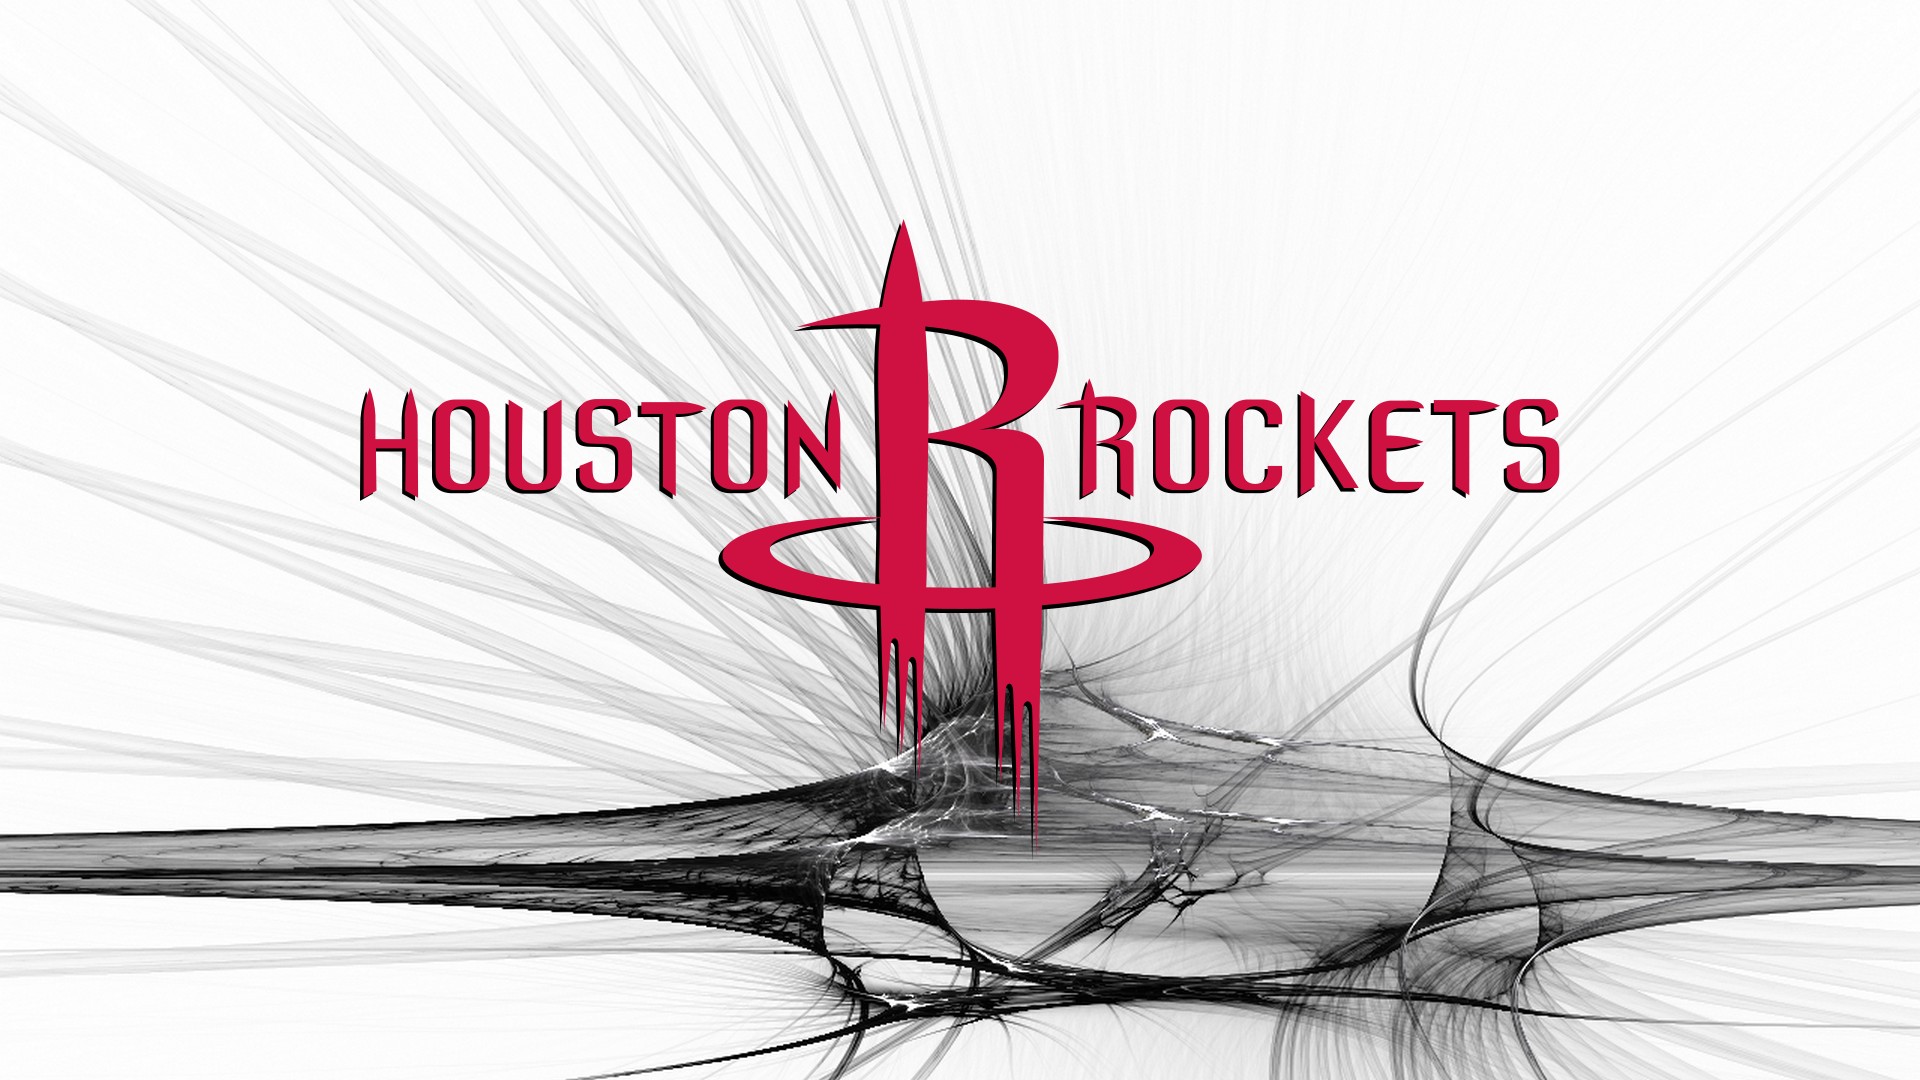 Rockets Wallpaper with image dimensions 1920x1080 pixel. You can make this wallpaper for your Desktop Computer Backgrounds, Windows or Mac Screensavers, iPhone Lock screen, Tablet or Android and another Mobile Phone device